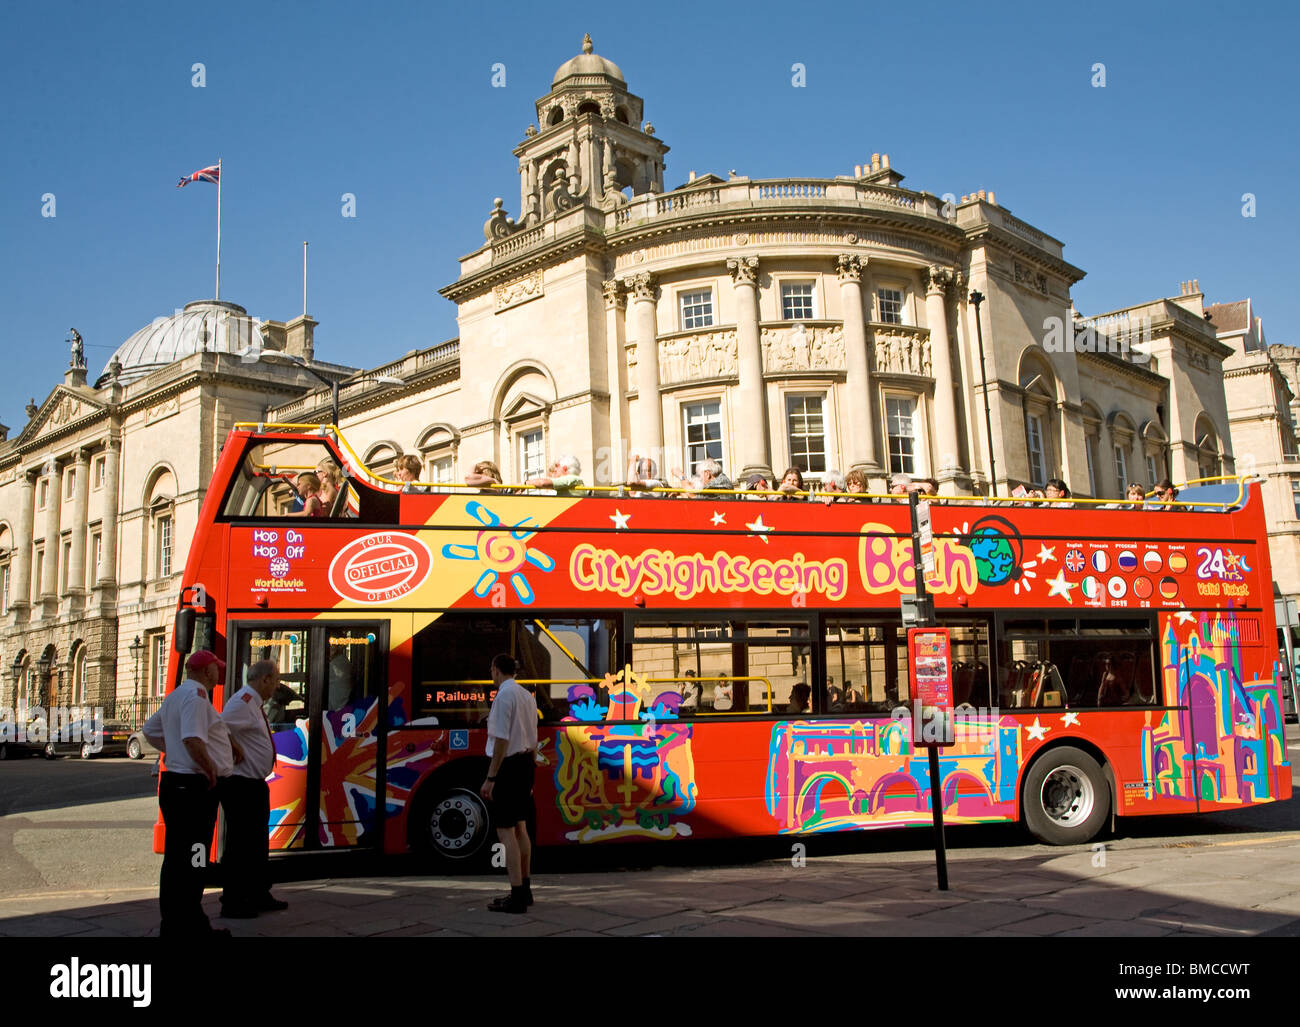 Double decker city sightseeing bus by the Guildhall, Bath Stock Photo